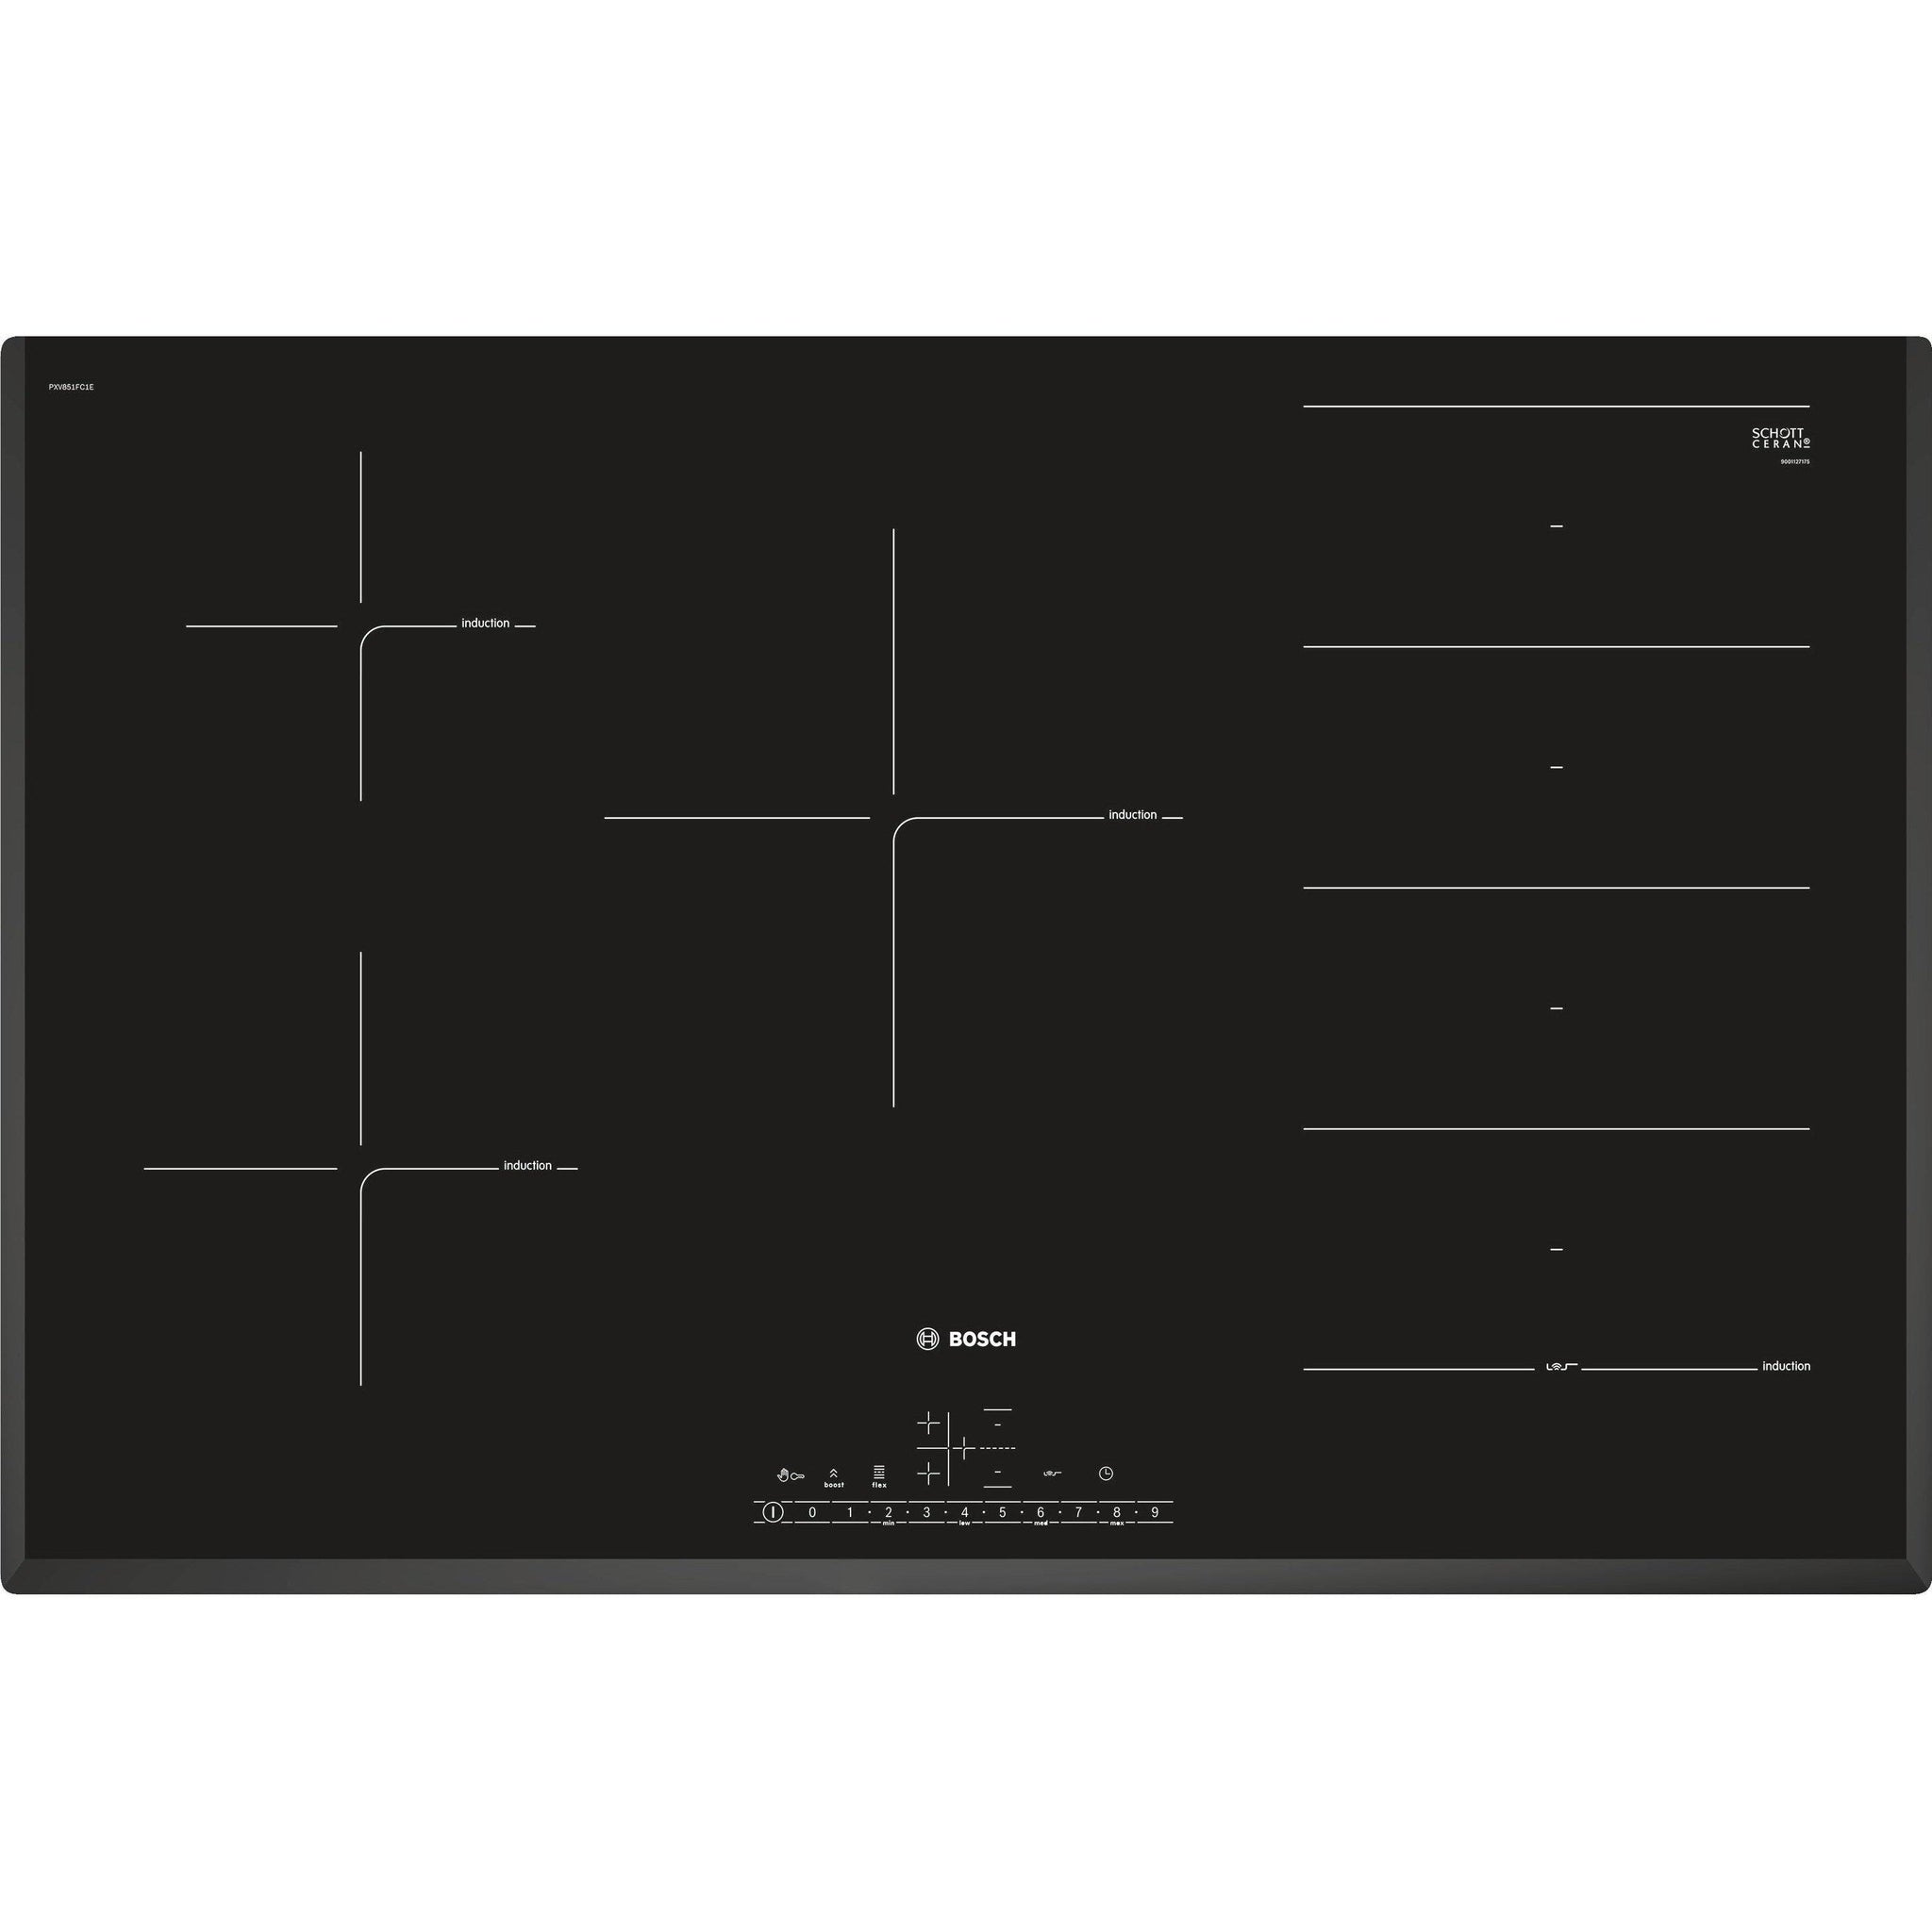 Bosch Series 6 Pxv851fc1e Induction Hob Delivery Within 57 Working Days Free Pan Set